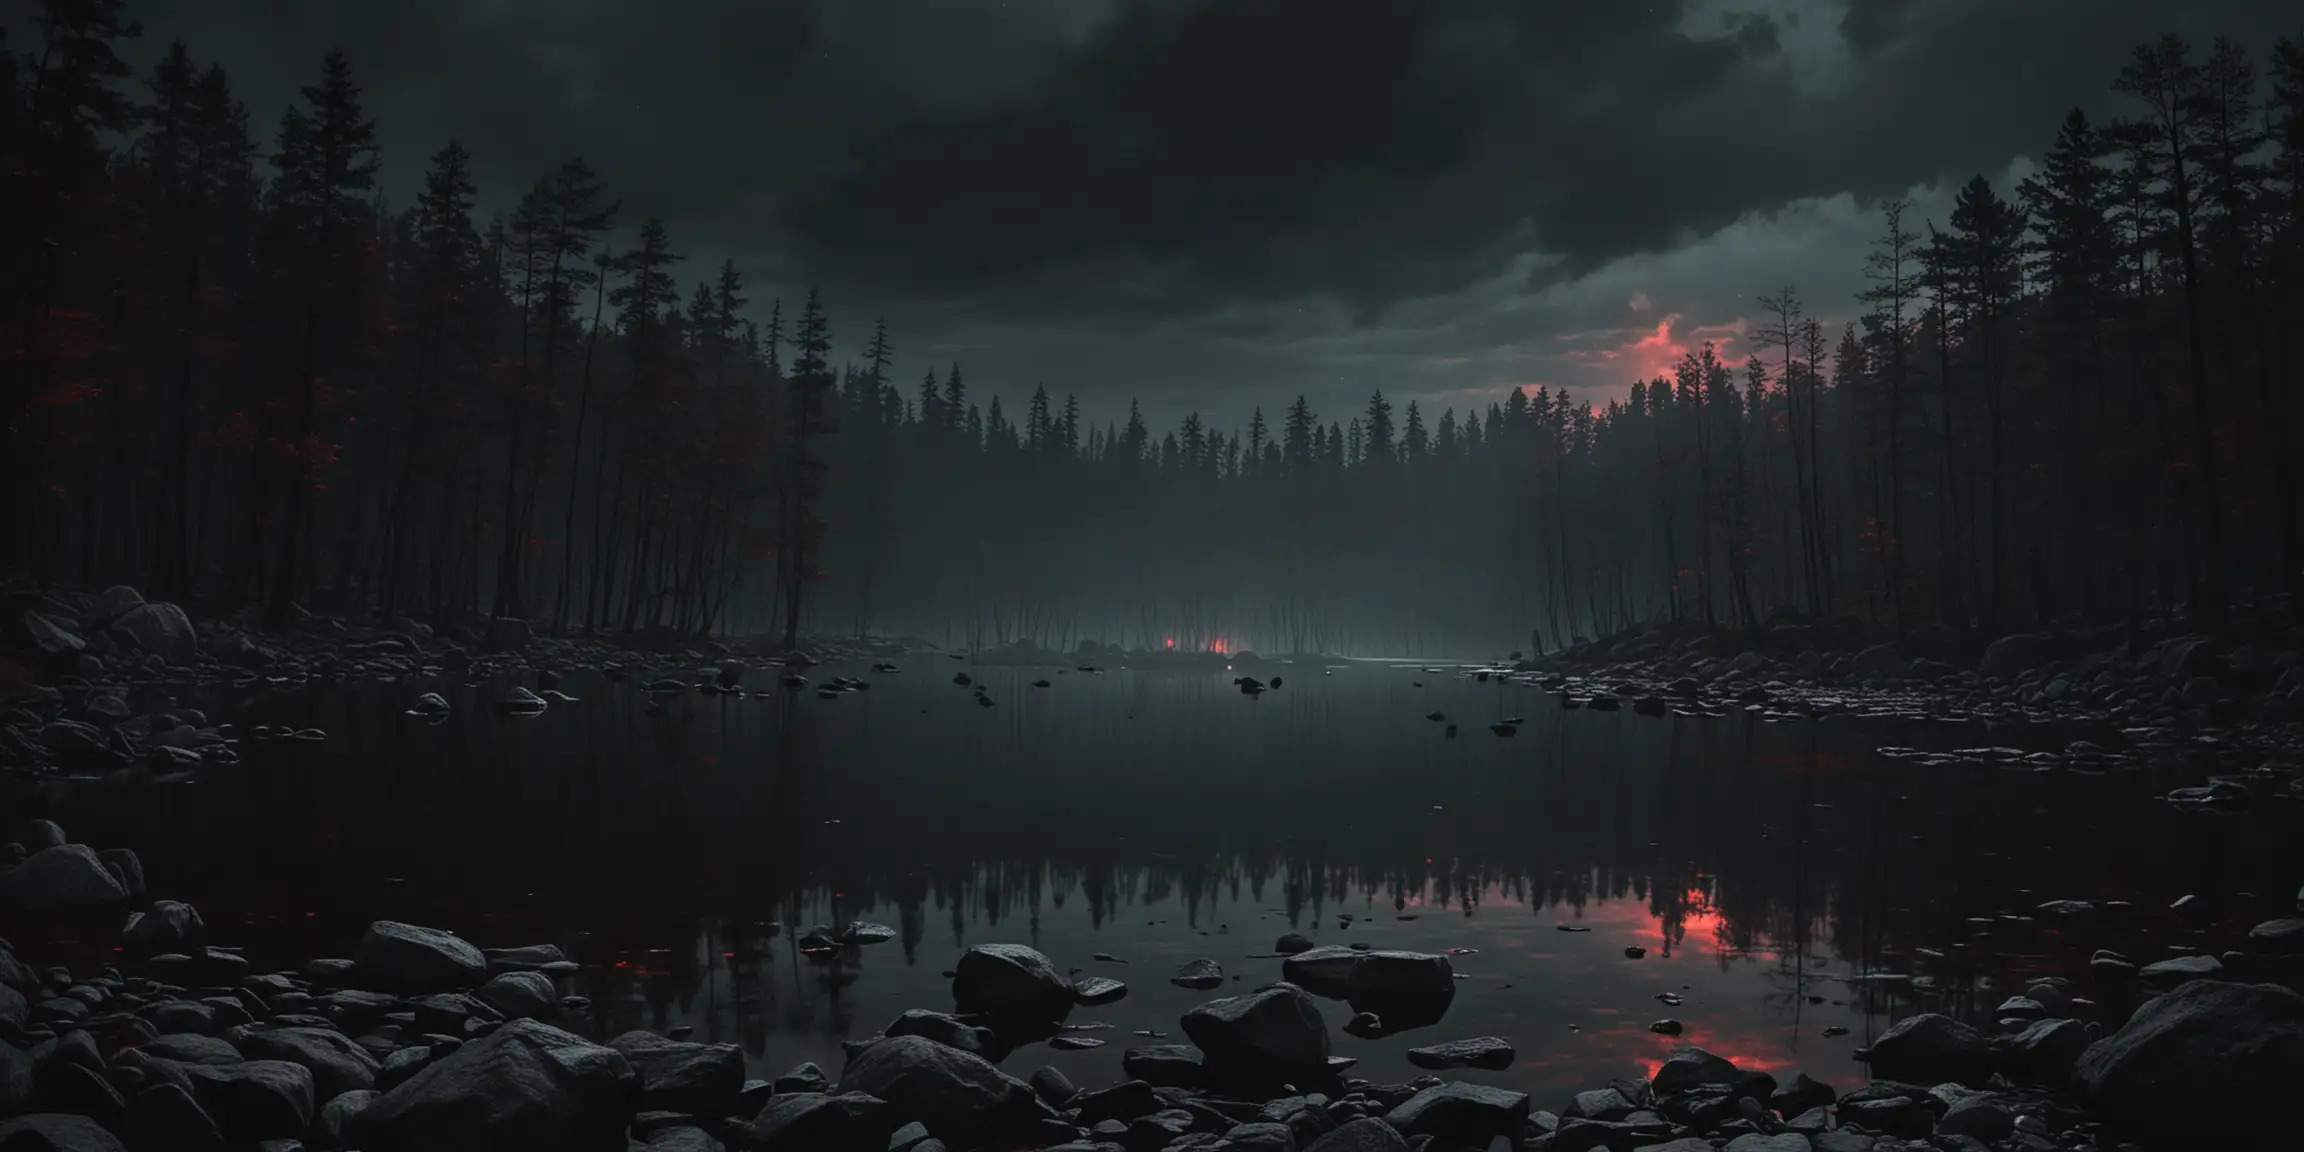 Eerie Dark Woods Landscape with Glowing Lake and Cinematic Lighting